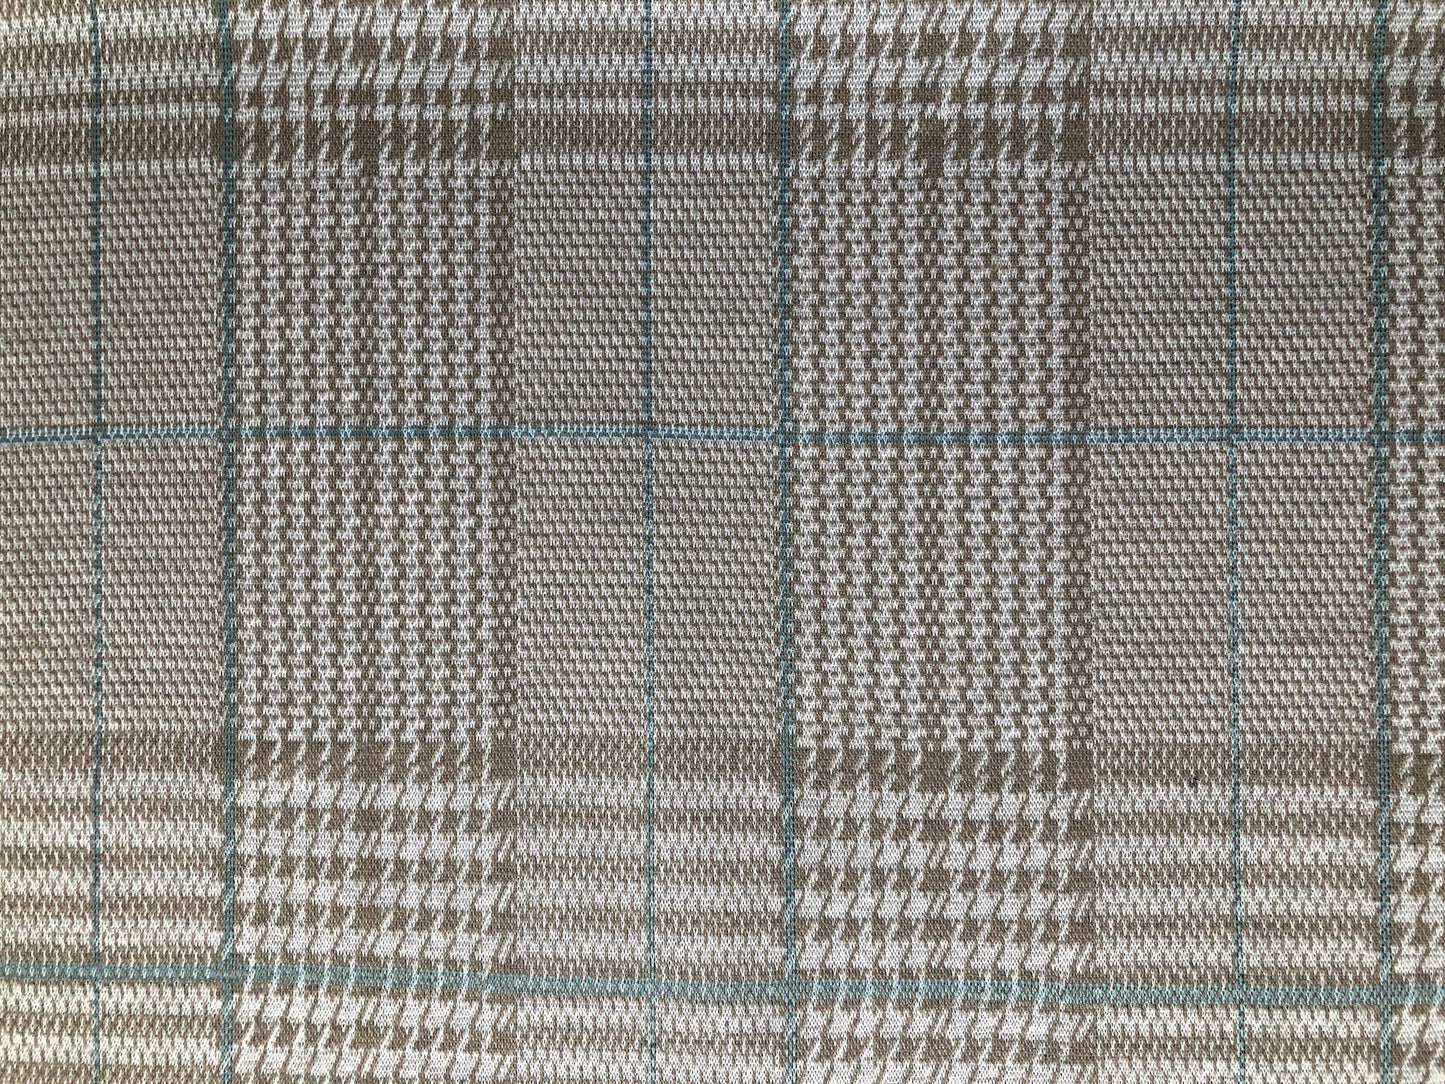 Beige/Pink Or Beige/Blue Houndstooth Plaid Stretchy Fabric